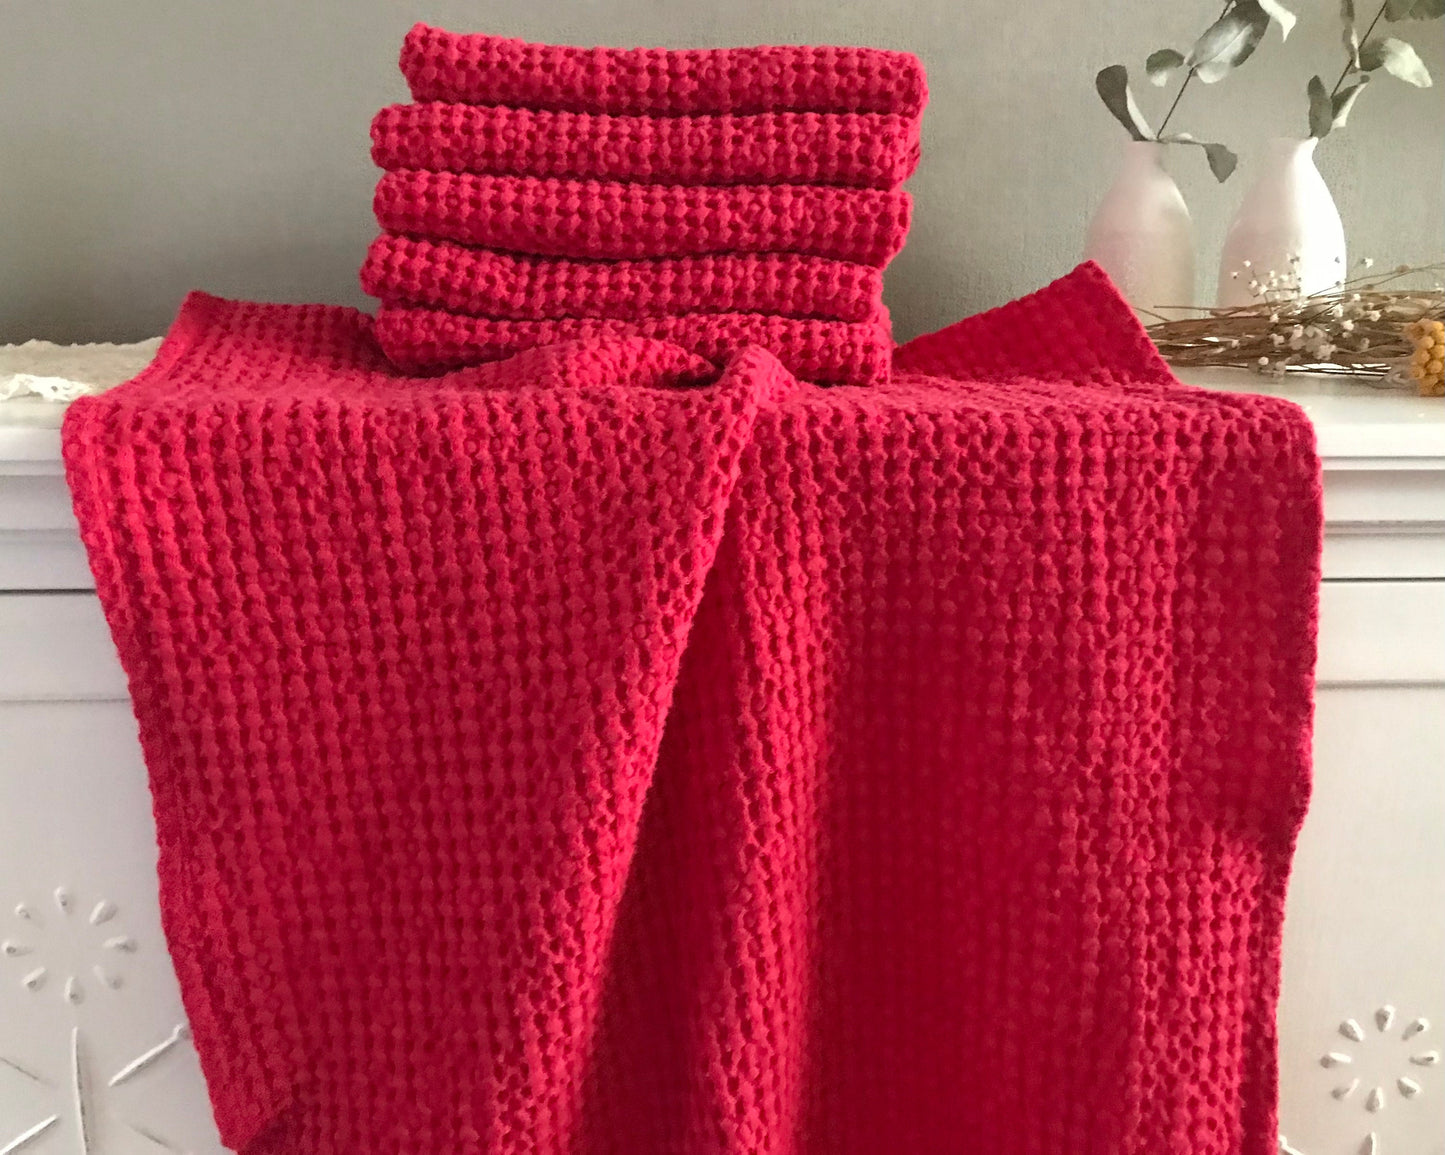 Linen waffle bath or hand towel in different sizes. Red